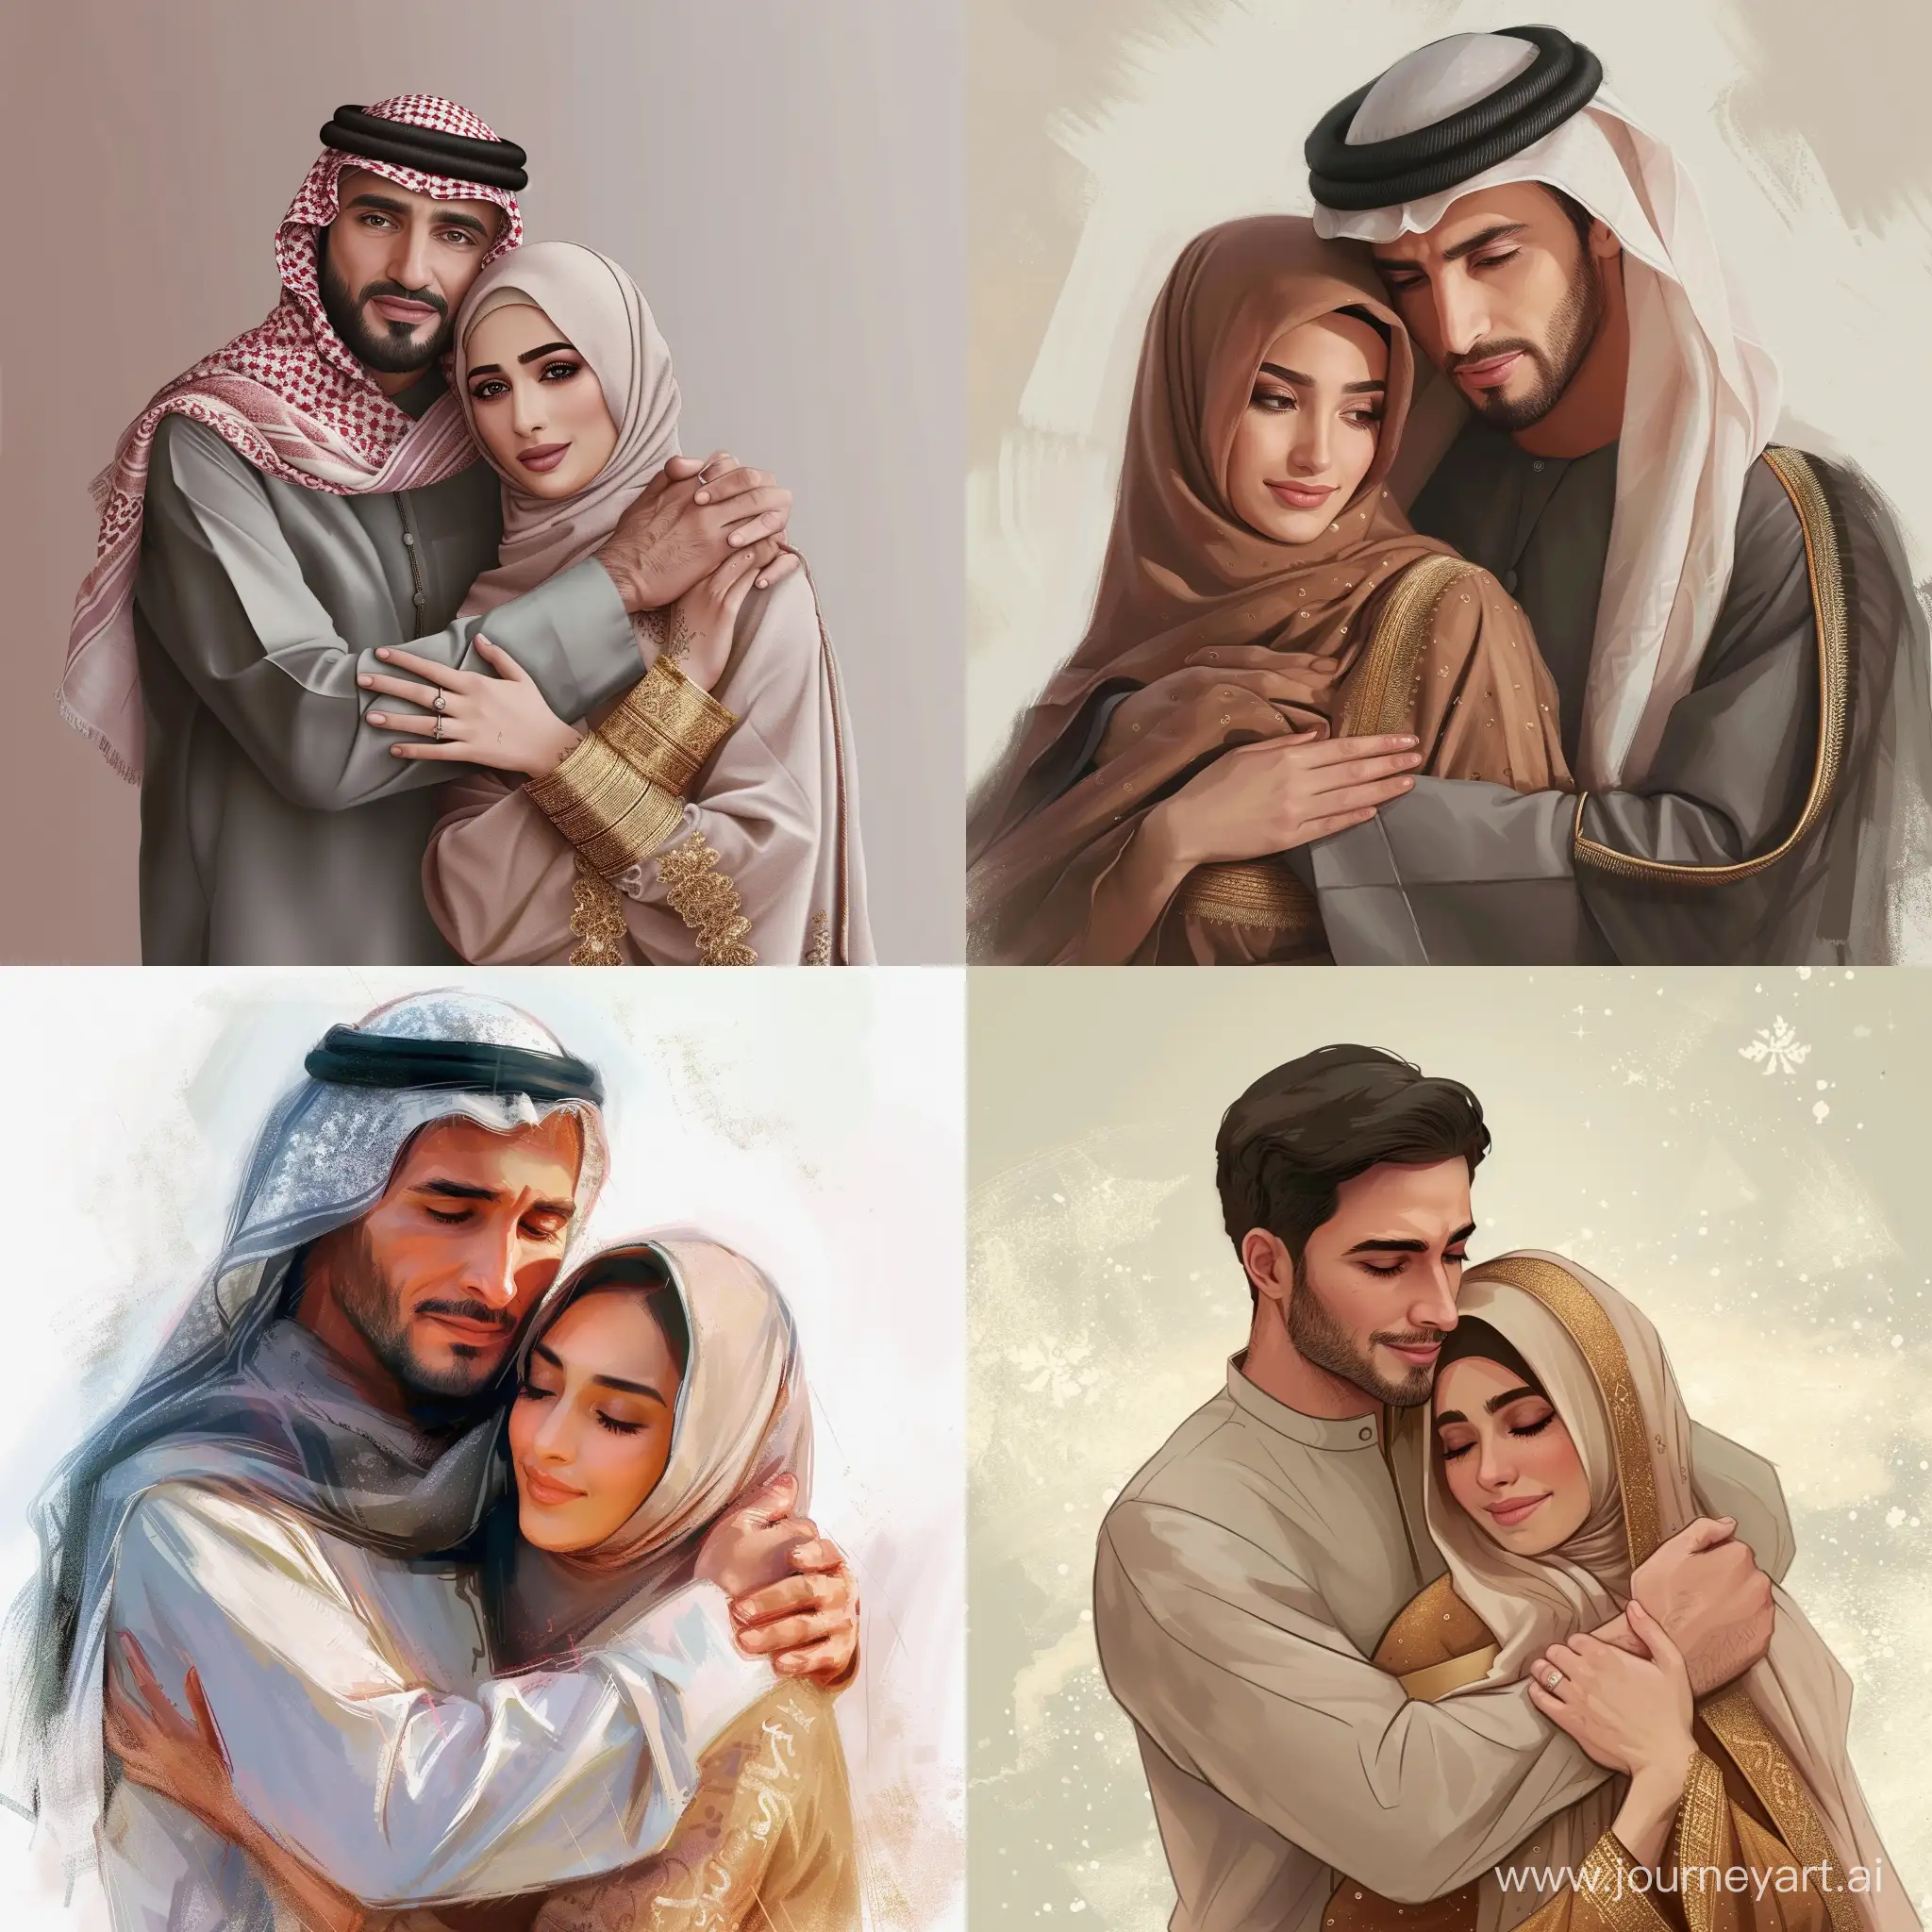 A man in Arabic clothes is hugging his wife. The woman wears hijab and Arabic dress. Both are beautiful and young. The facial details are perfect.